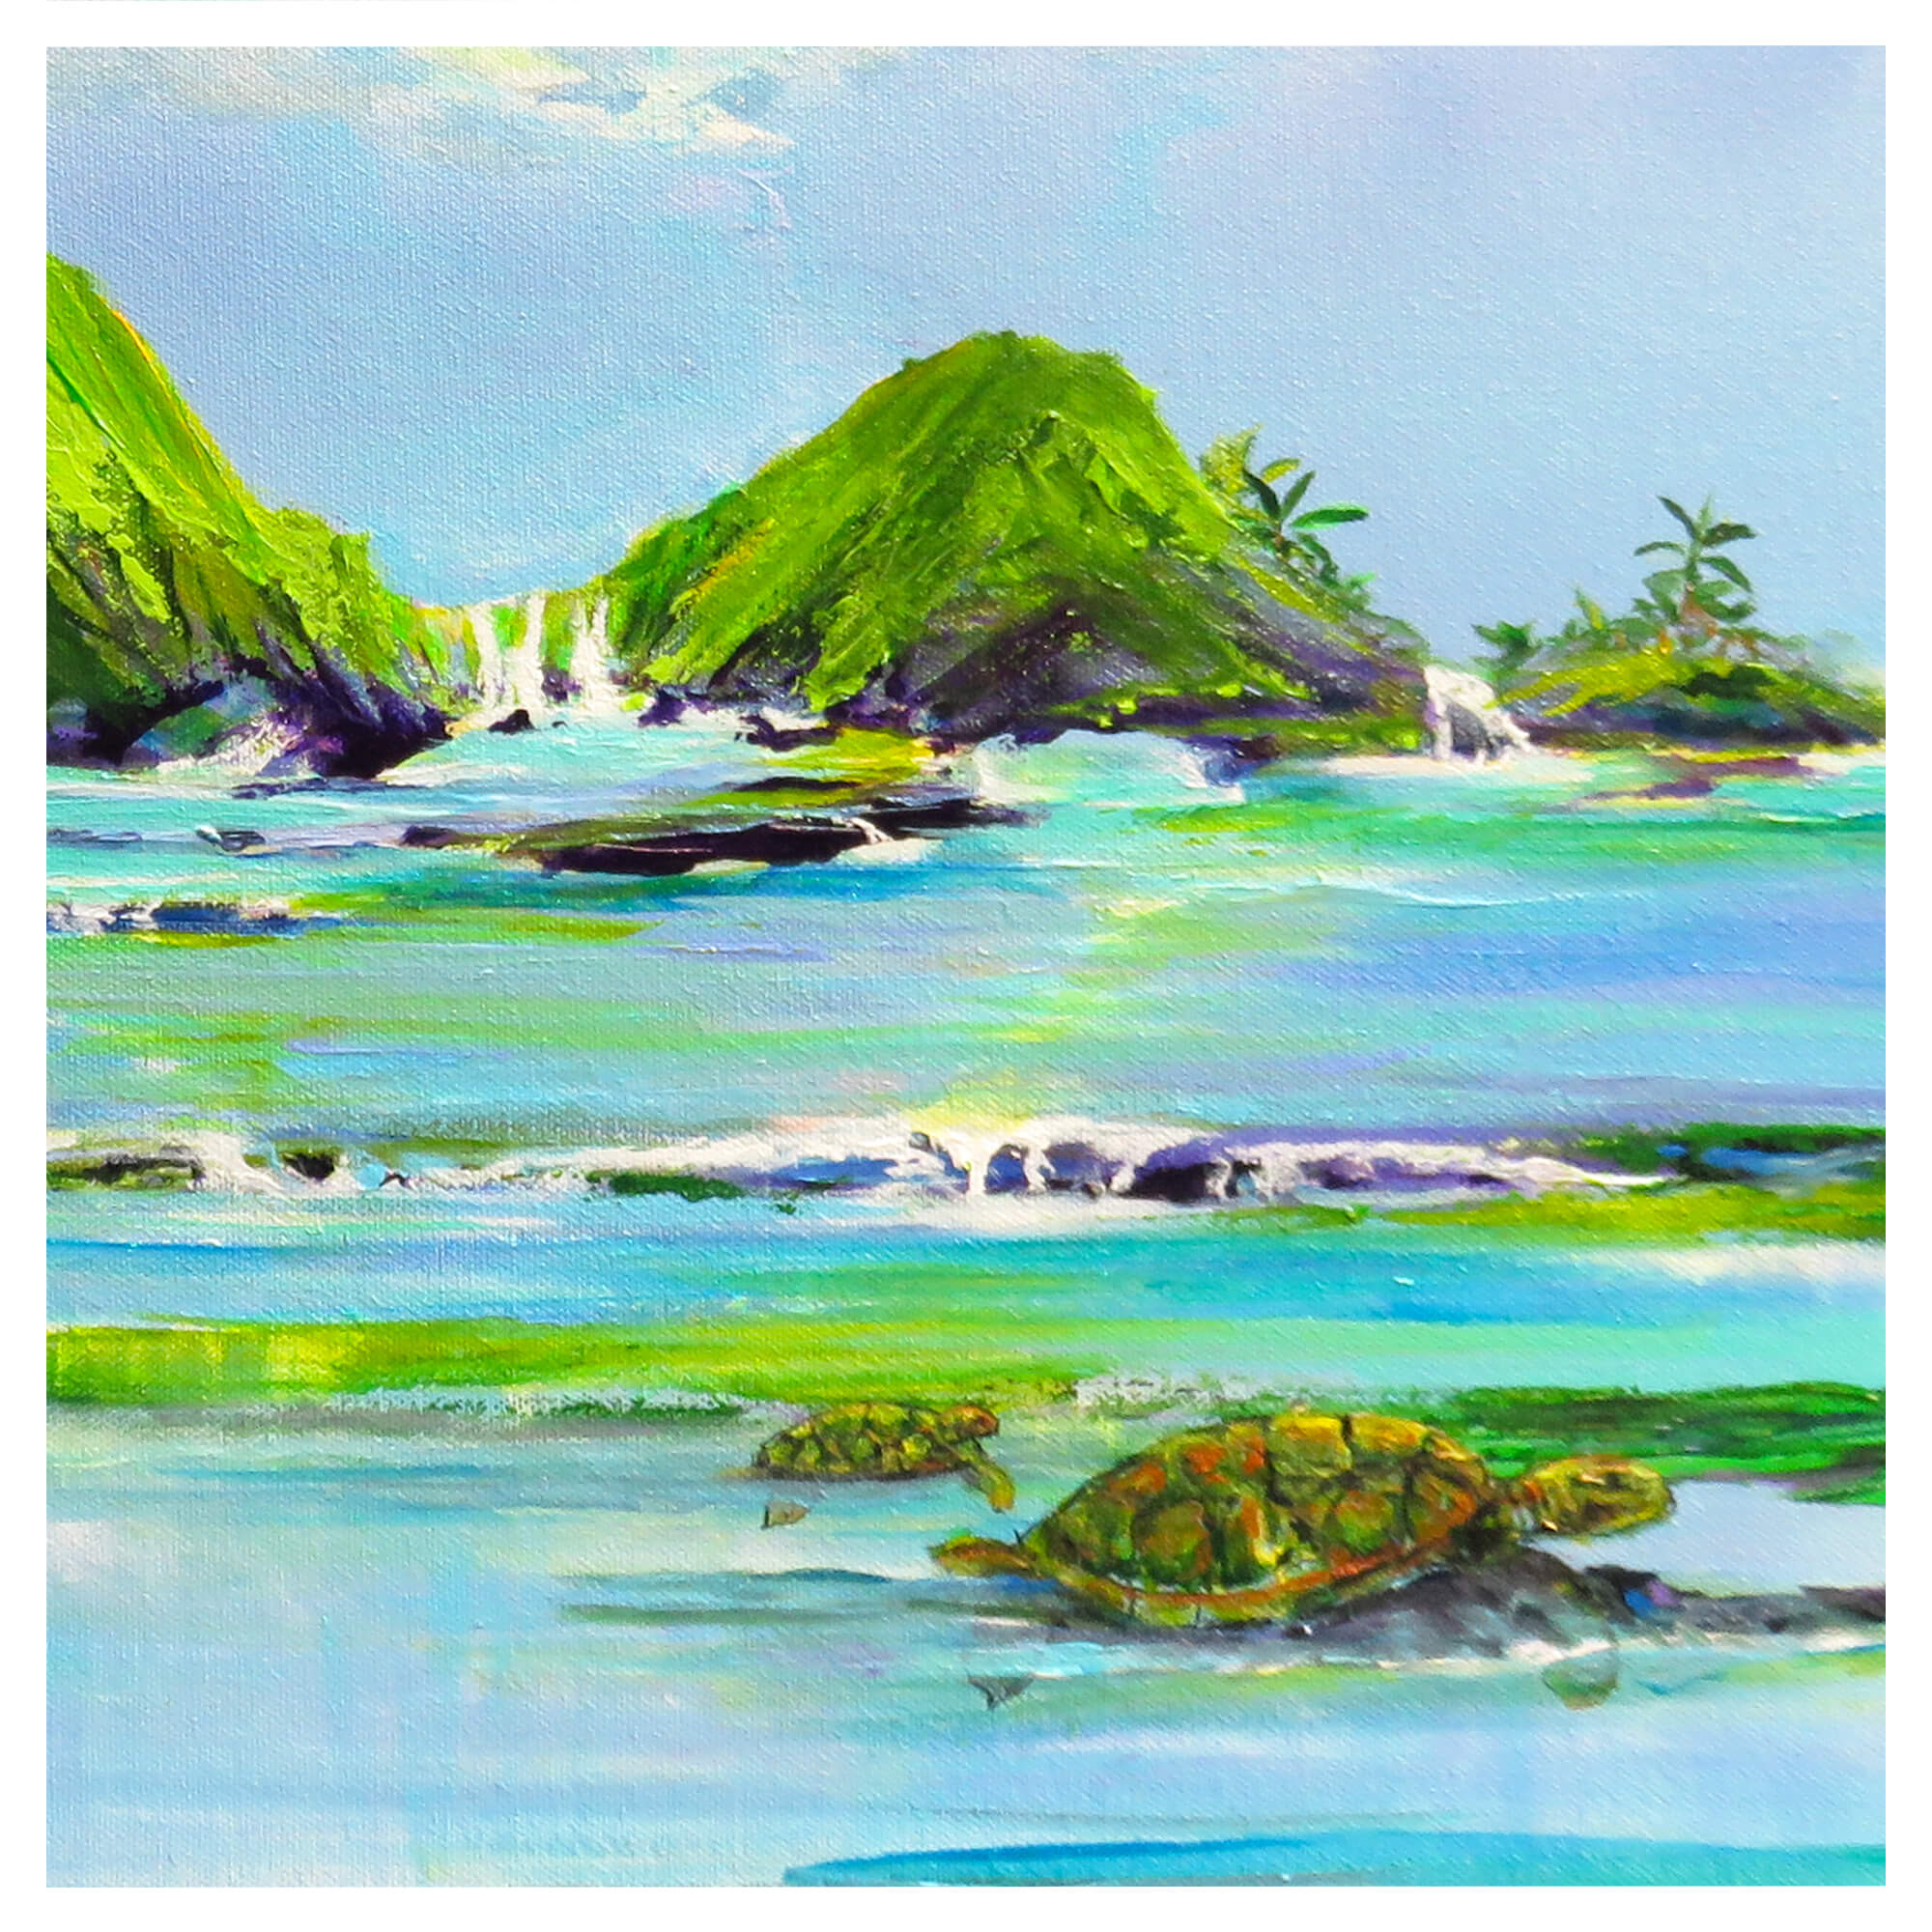 Sea turtles and distant mountains by Hawaii artist Jess Burda